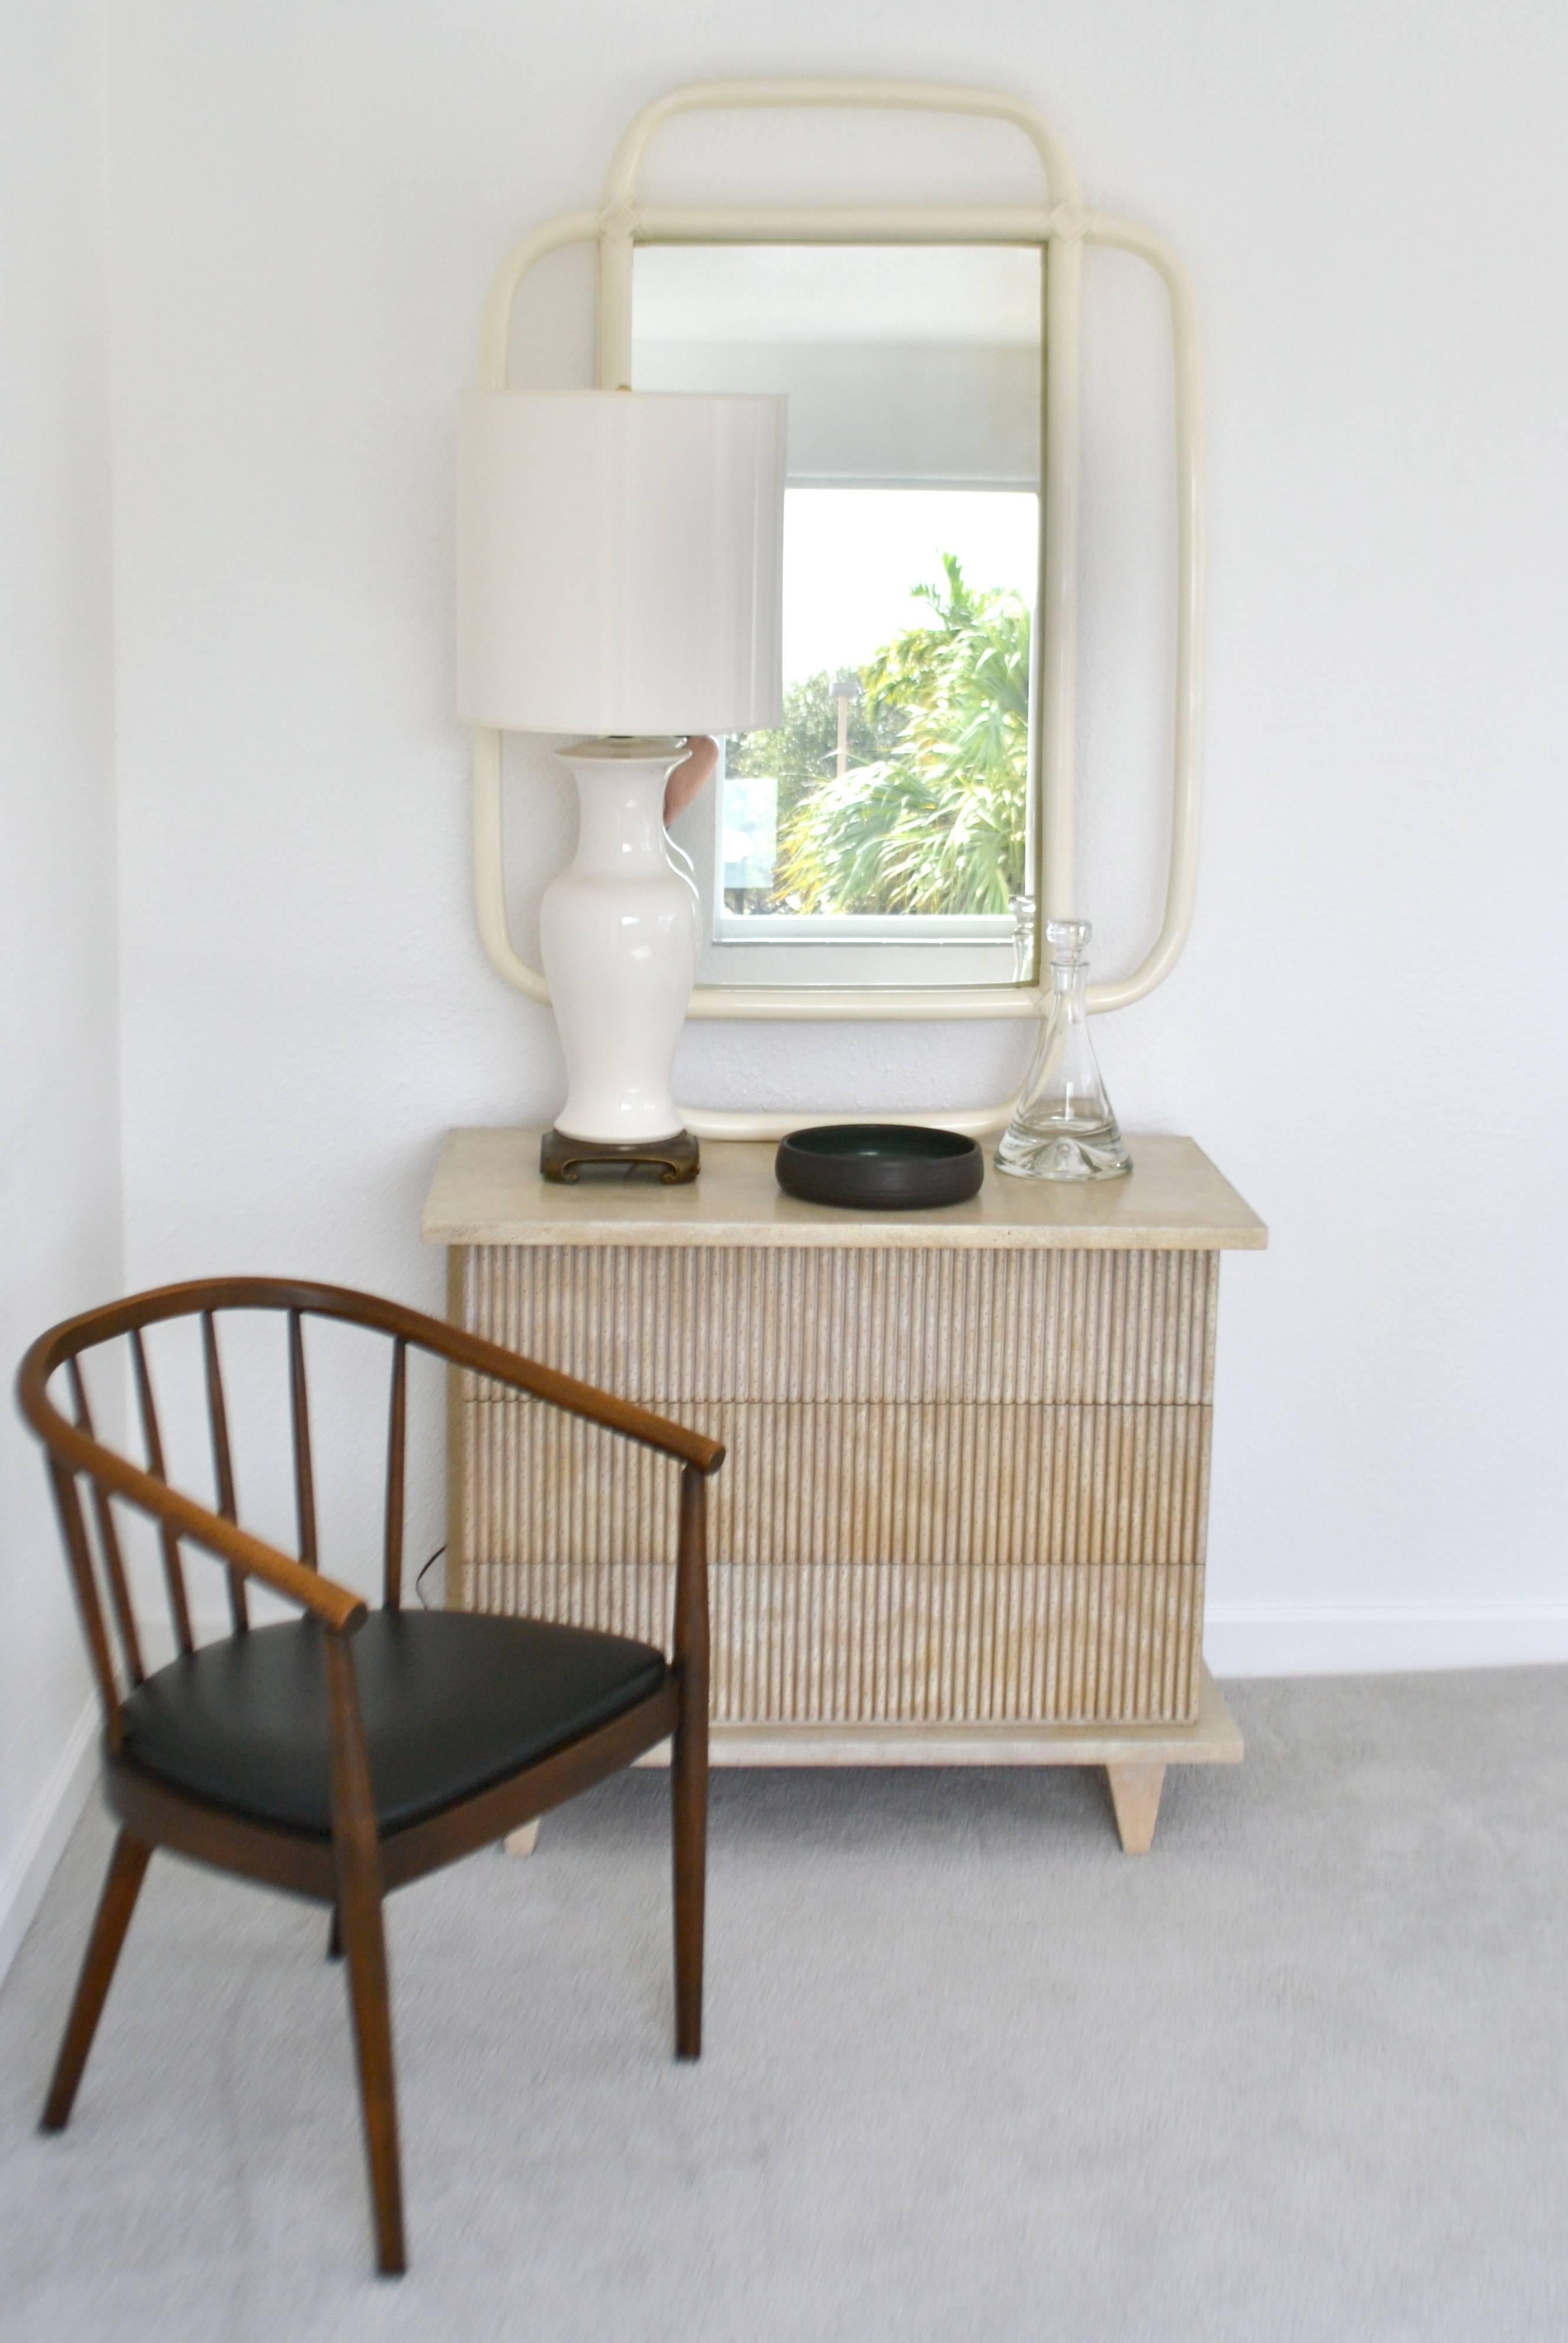 Glamorous Mid-Century bent bamboo wall mirror, circa 1960s. This sculptural artisan crafted mantel mirror is designed in a white lacquer finish and accented with rattan details. Measurements: The overall height is 52